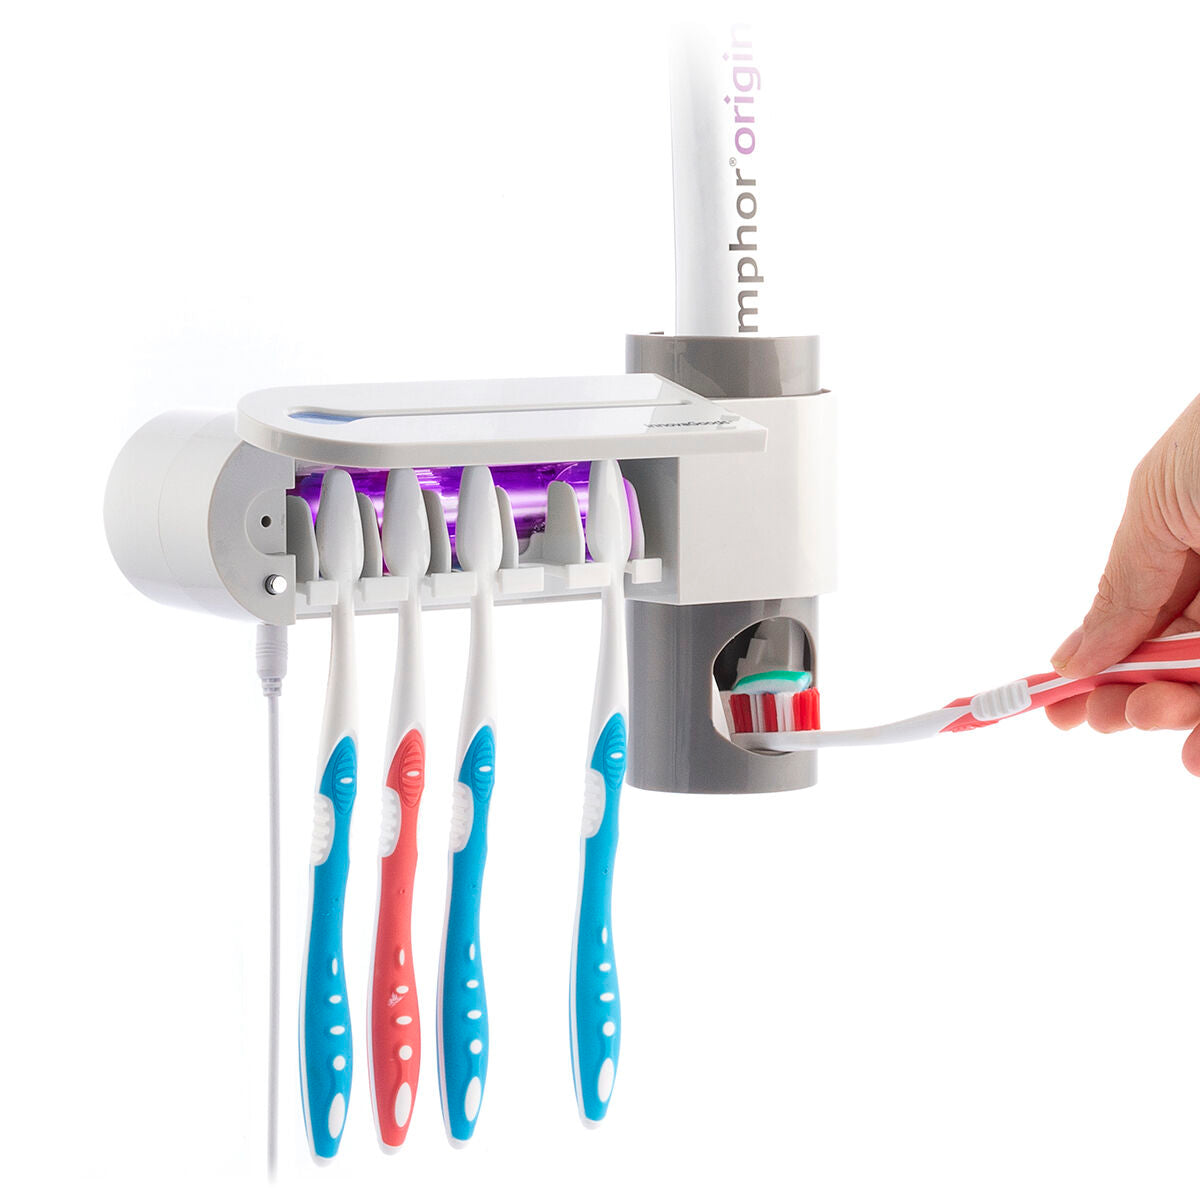 UV Toothbrush Steriliser with Stand and Toothpaste Dispenser Smiluv